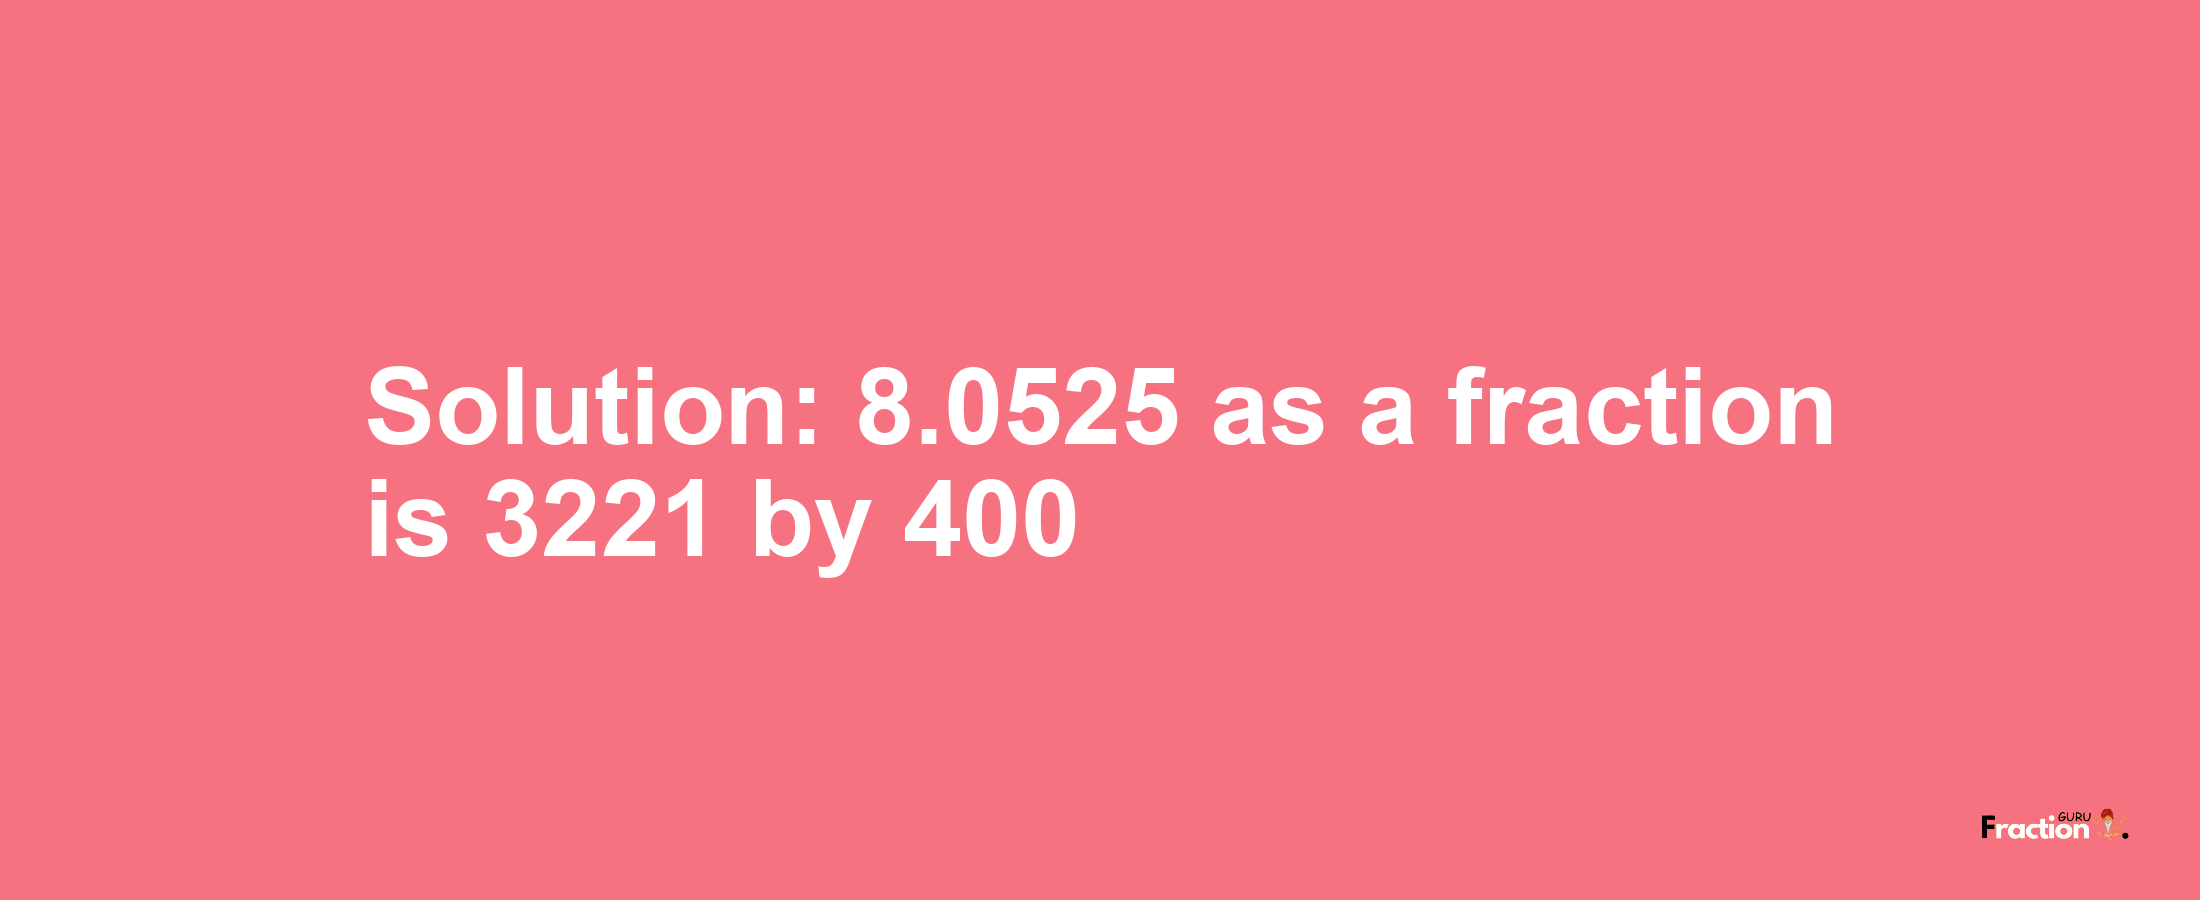 Solution:8.0525 as a fraction is 3221/400